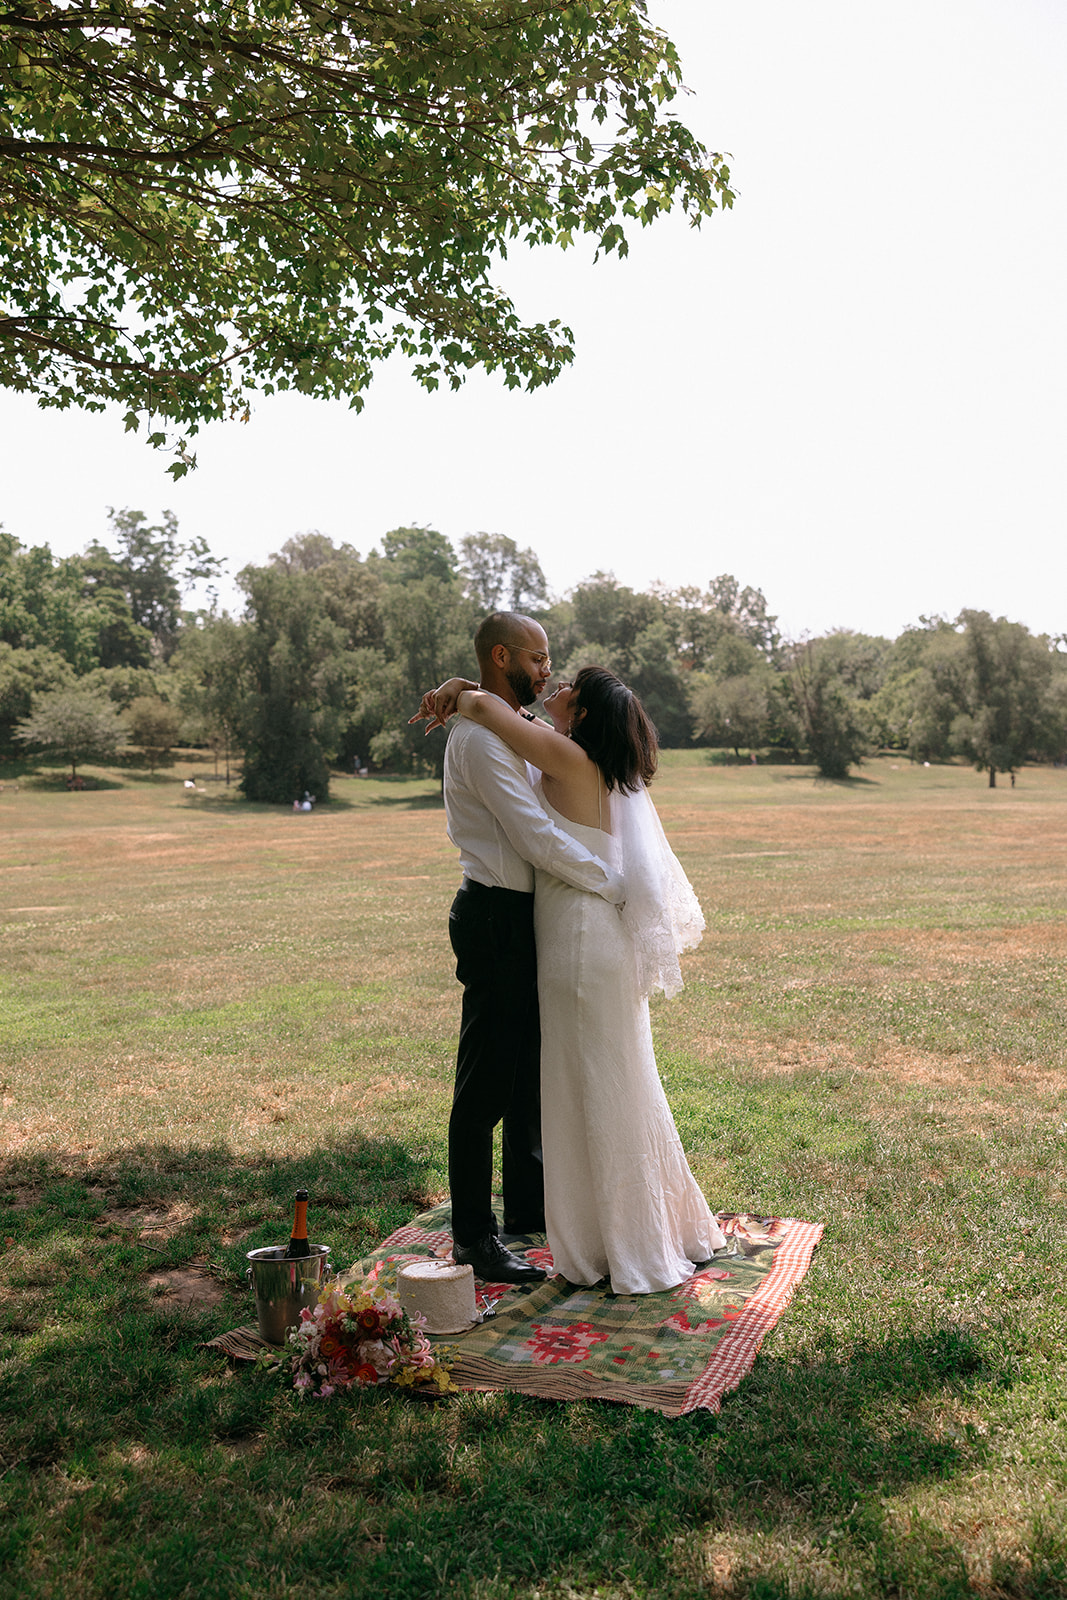 A couple eloping in Brooklyn had an intimate picnic and cake cutting at Prospect Park